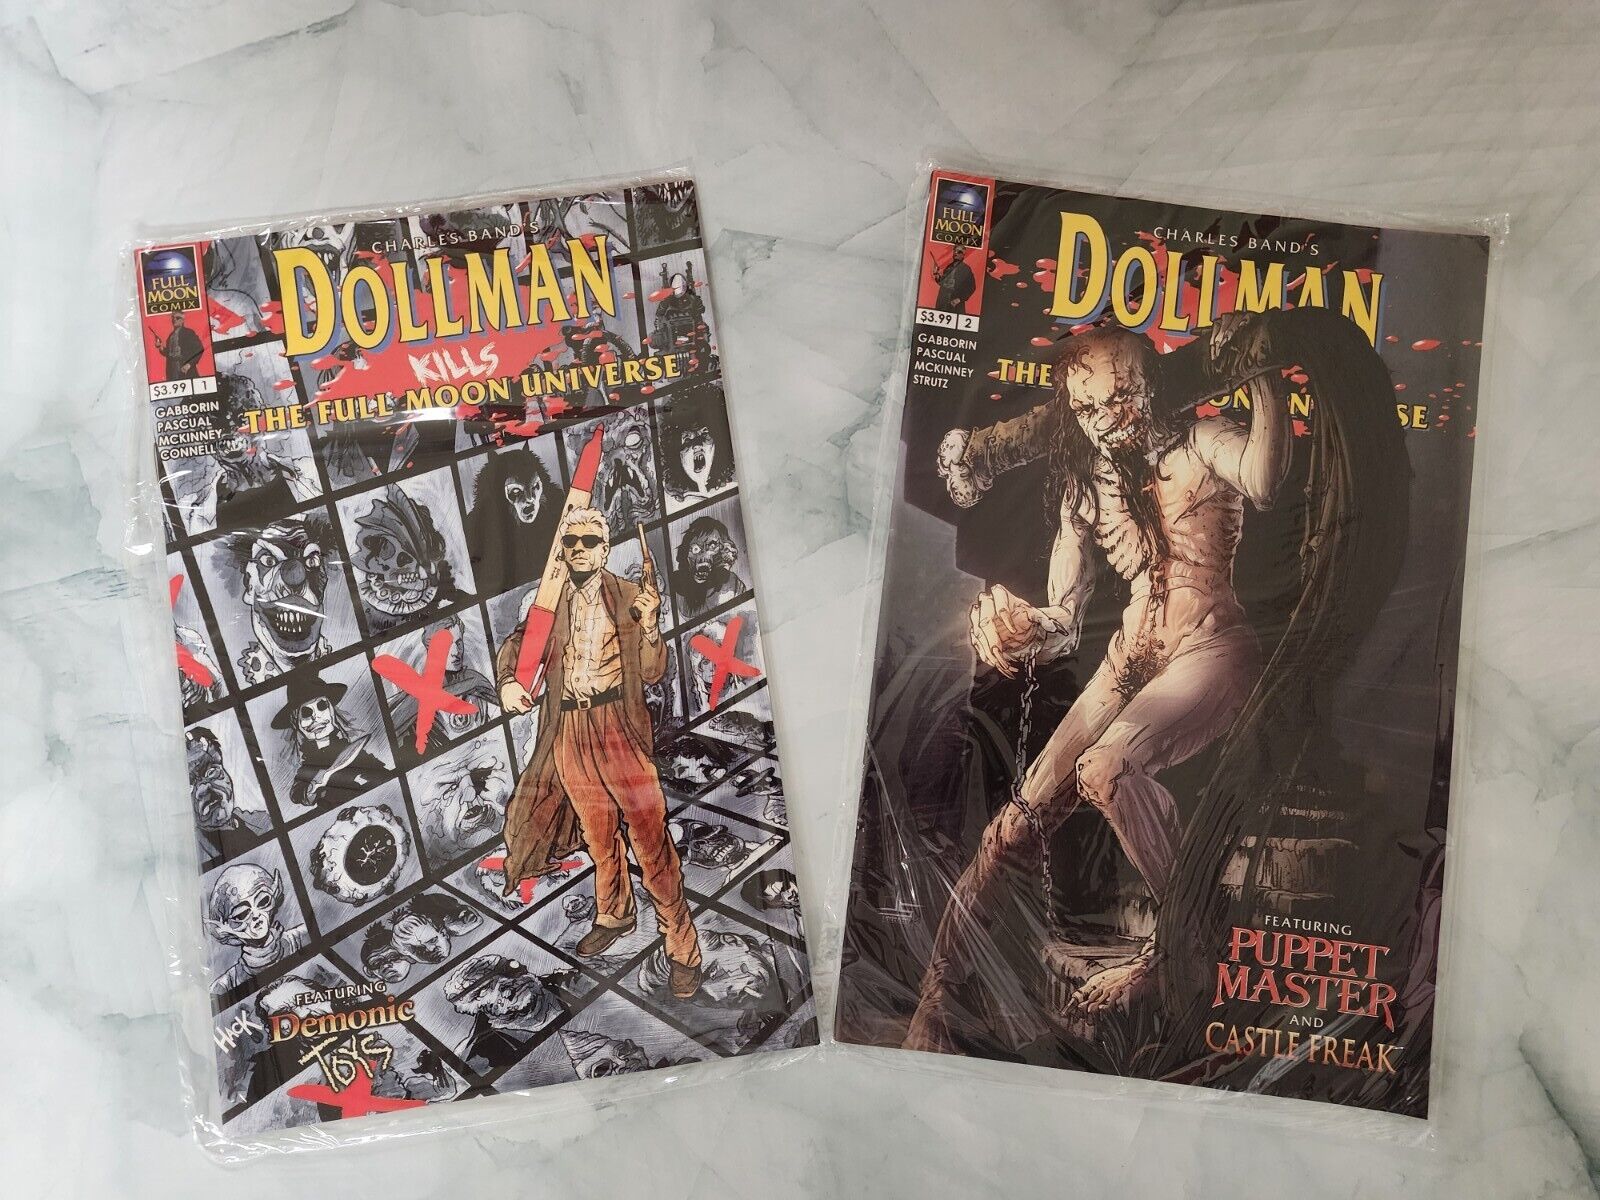 Dollman Kills The Full Moon Universe  # 1 and #2.  Brand new, Factory Sealed